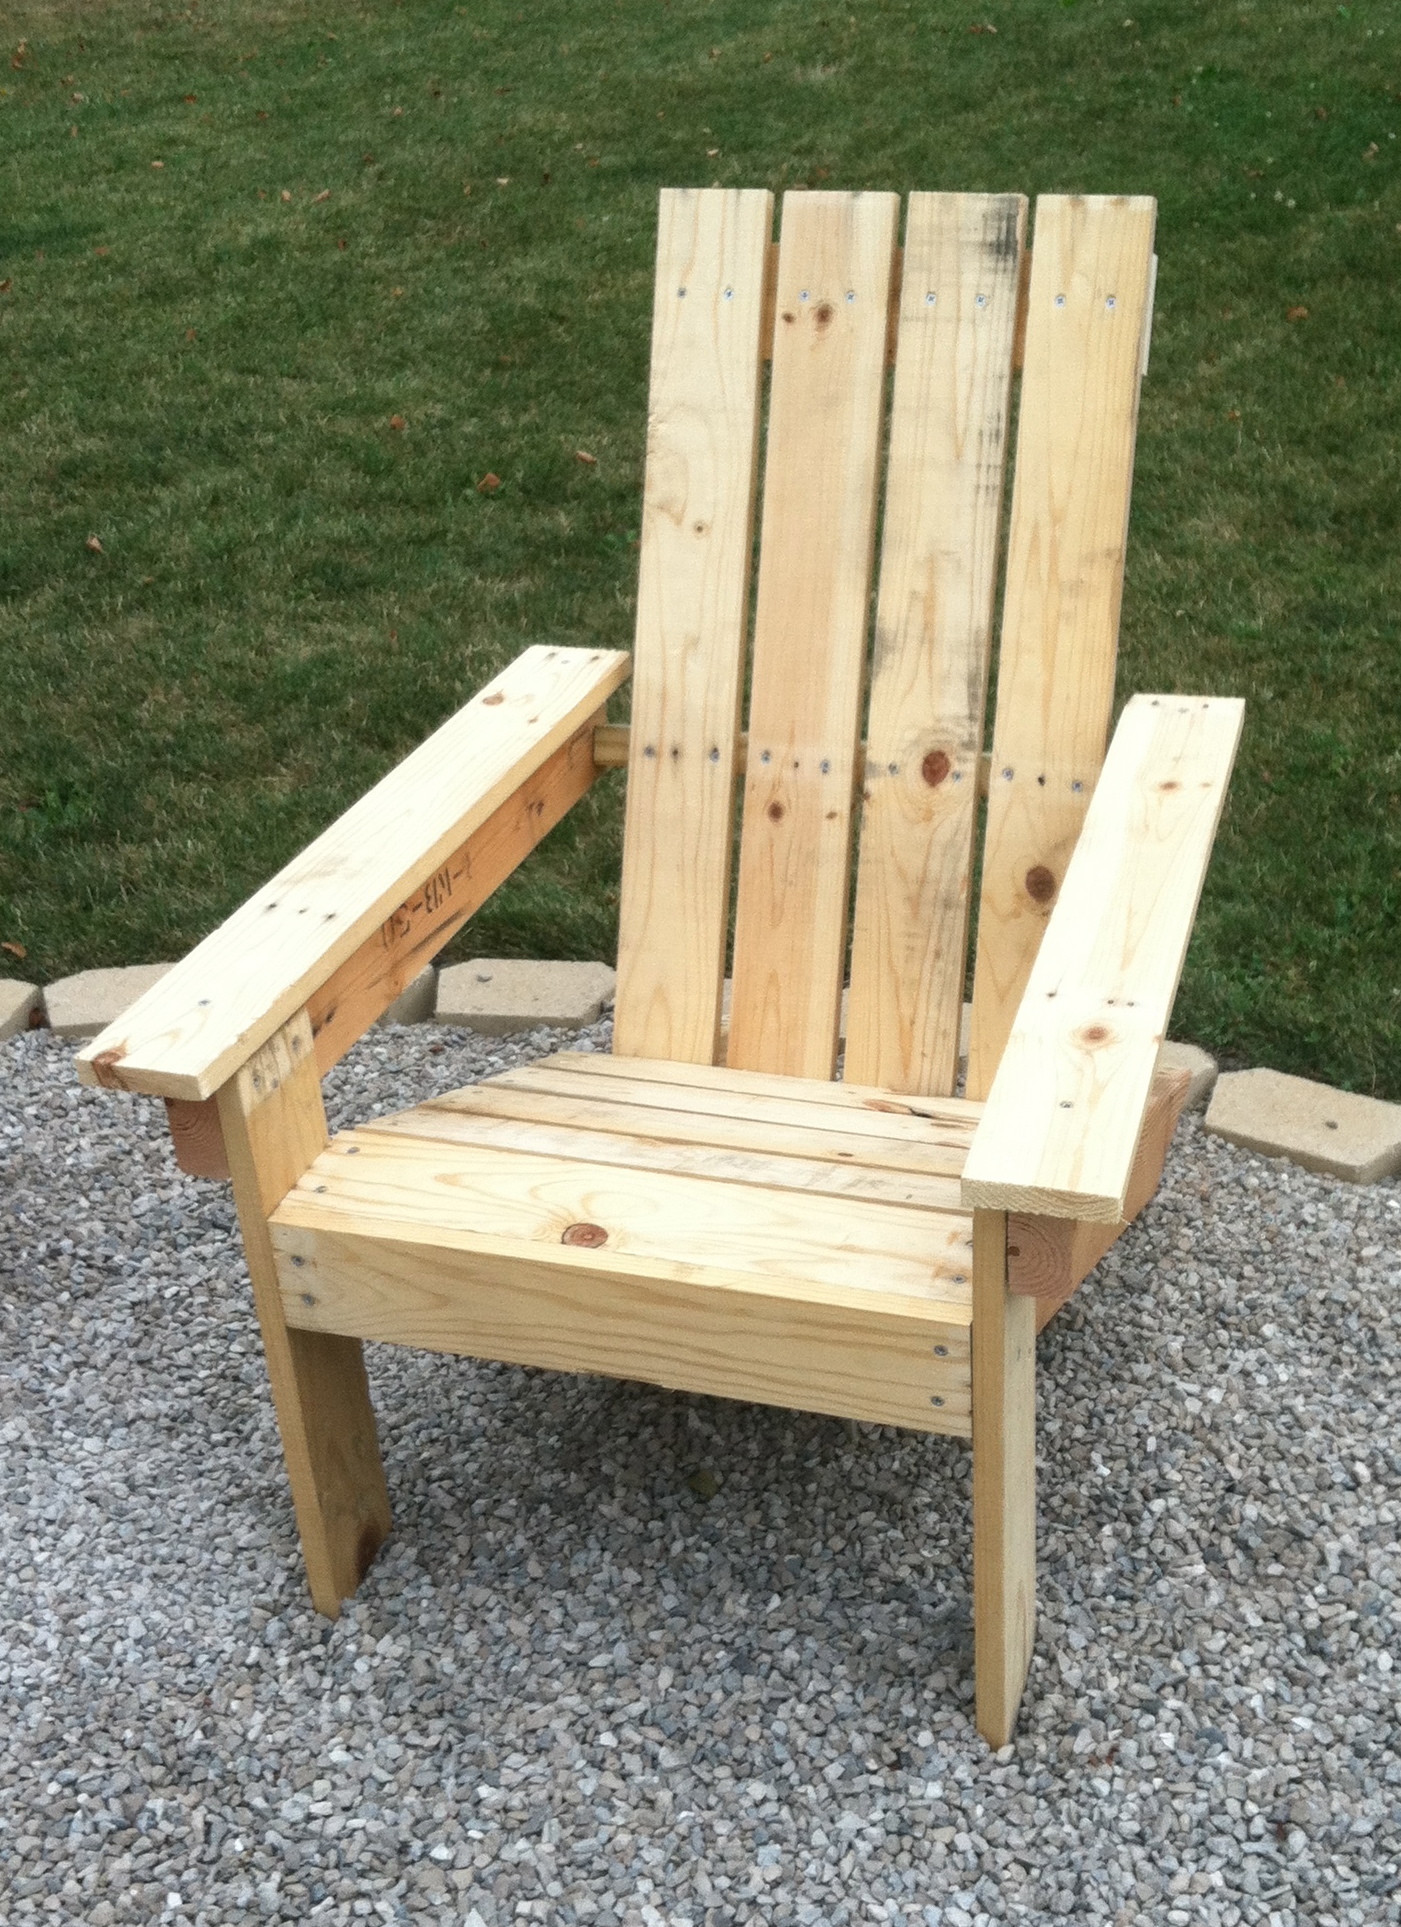 DIY Wood Chairs
 DIY Adirondack Pallet Wood Chairs for $2 30